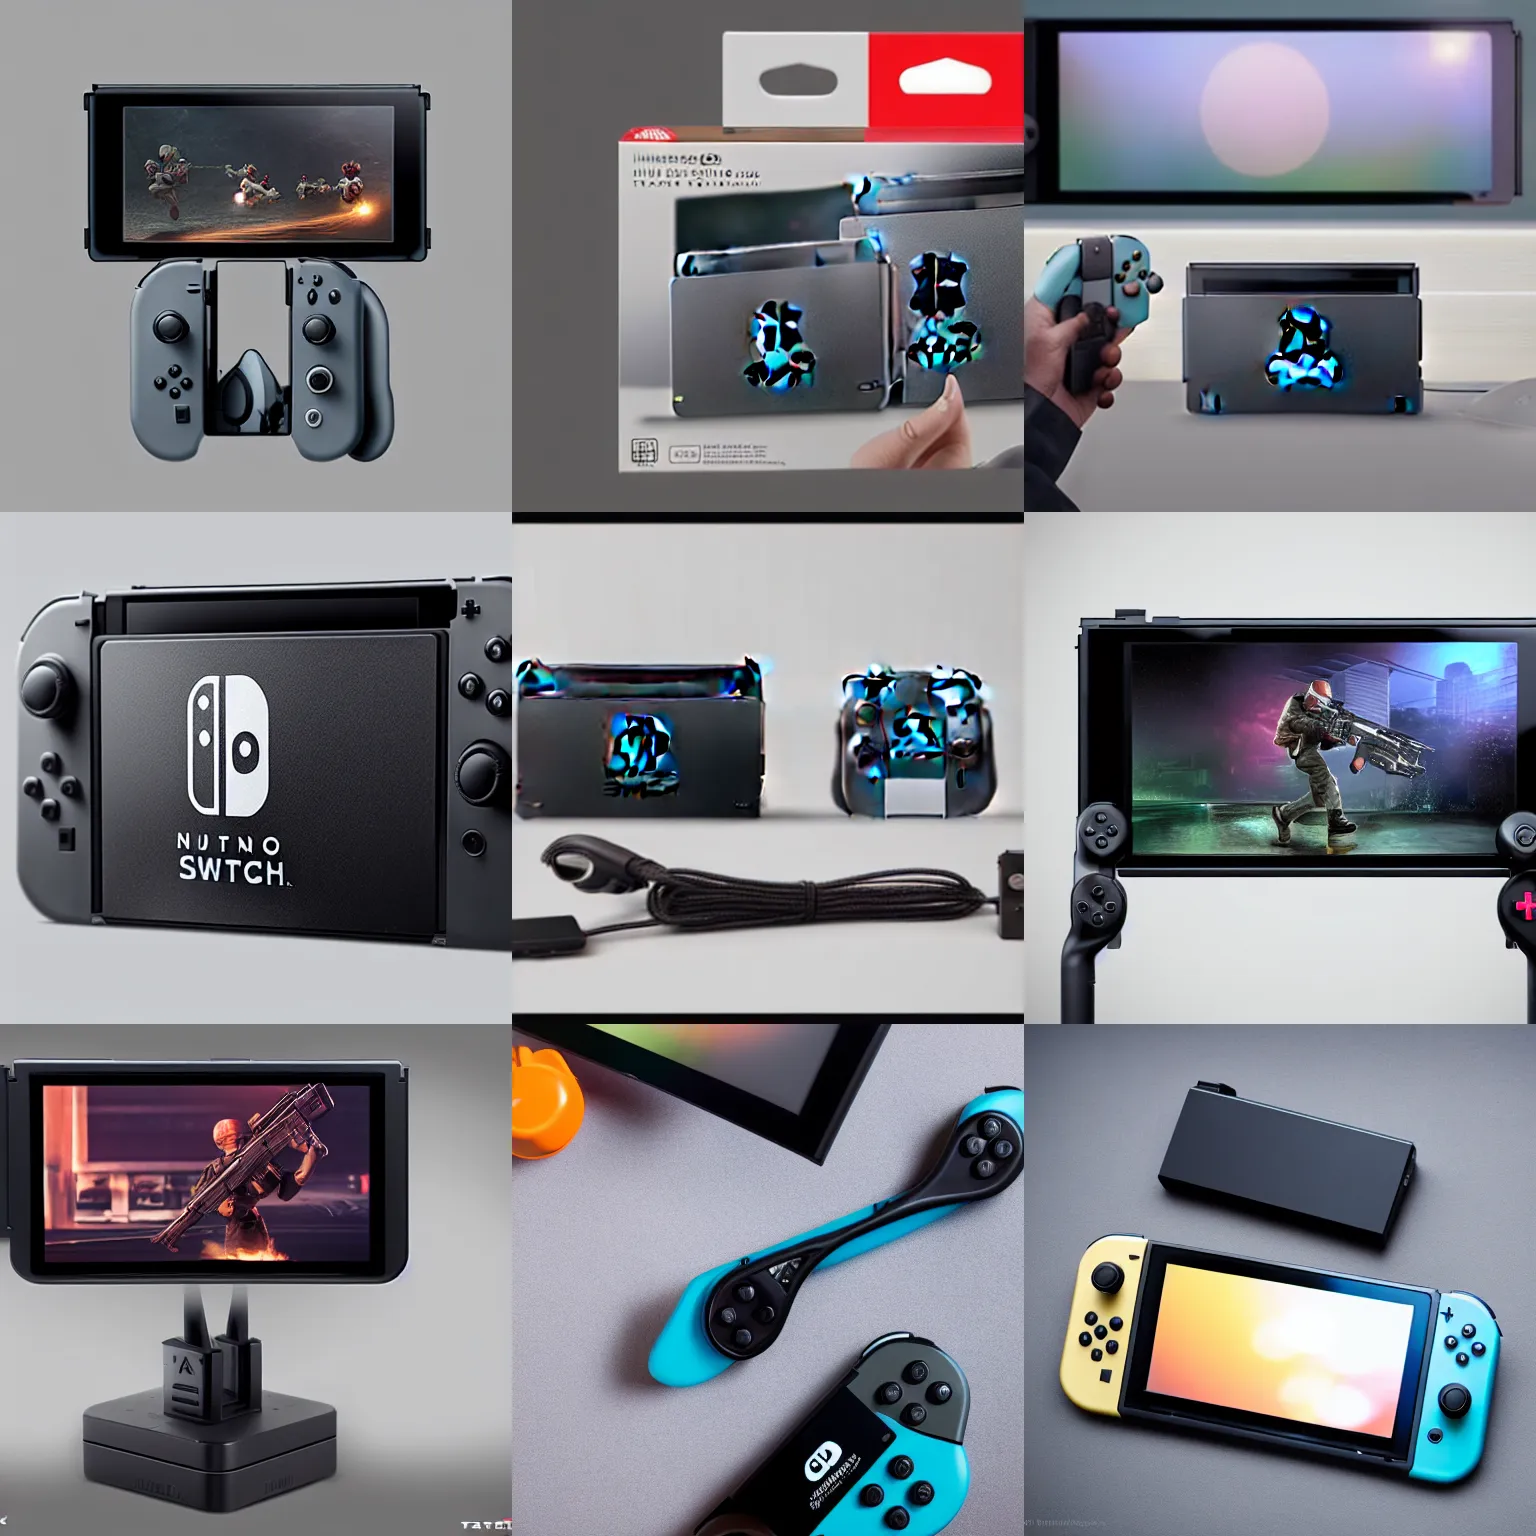 Prompt: ( ( ( ak - 4 7 ) ) ) designed by nintendo as a controller for nintendo switch, studio lighting, product photography